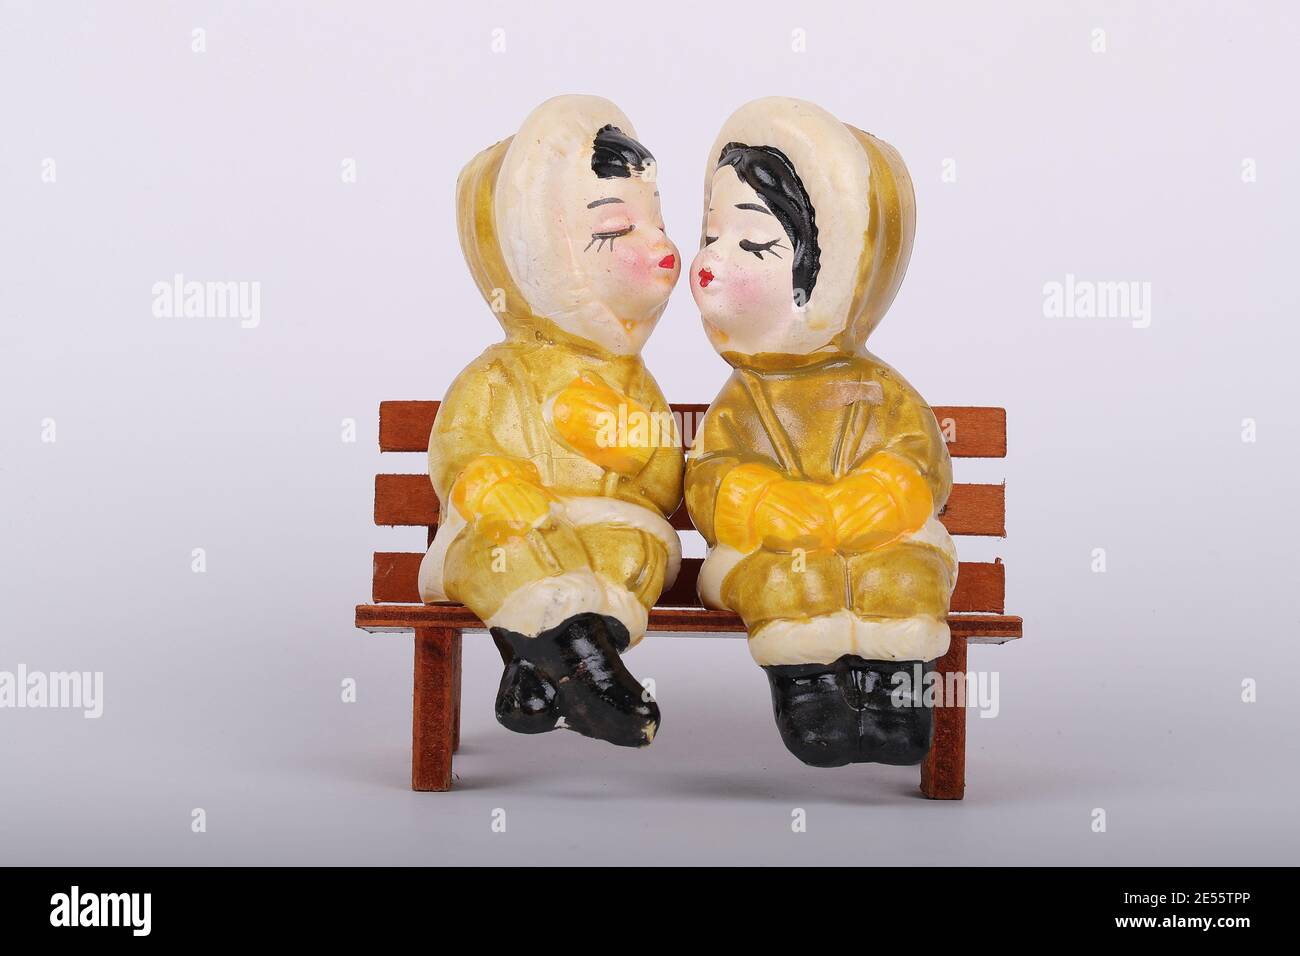 Vintage girls sitting on a bench Salt and Pepper Shakers from the 70's - 80's. Luke Durda/Alamy Stock Photo